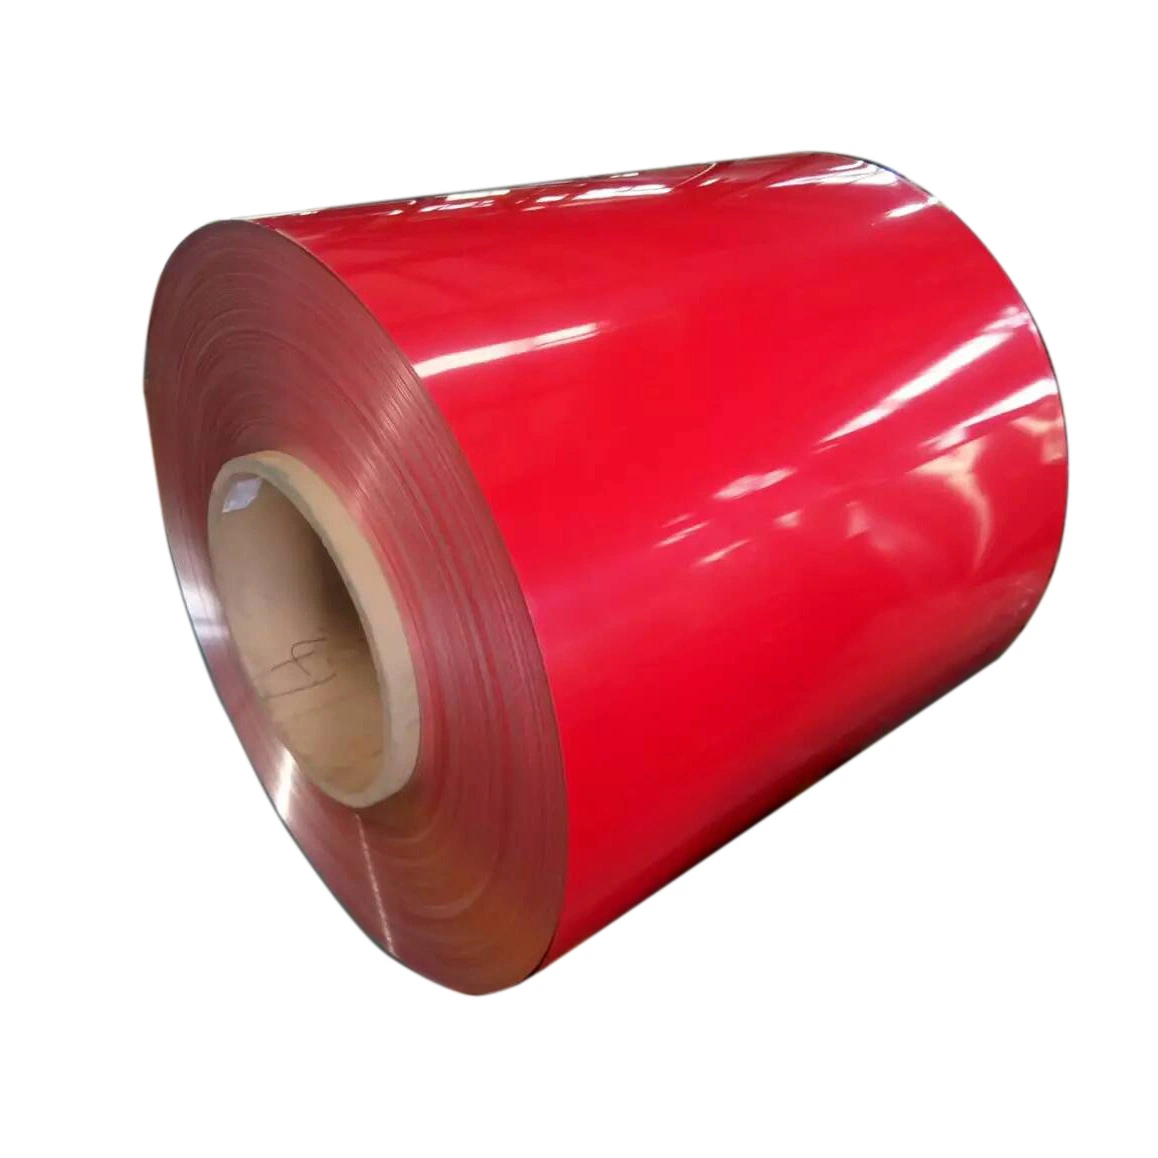 Ral9002/9006 9015 5016 1022 Z275 Prepainted Color Coated Galvanized Steel Sheet in Coil PPGI/PPGL